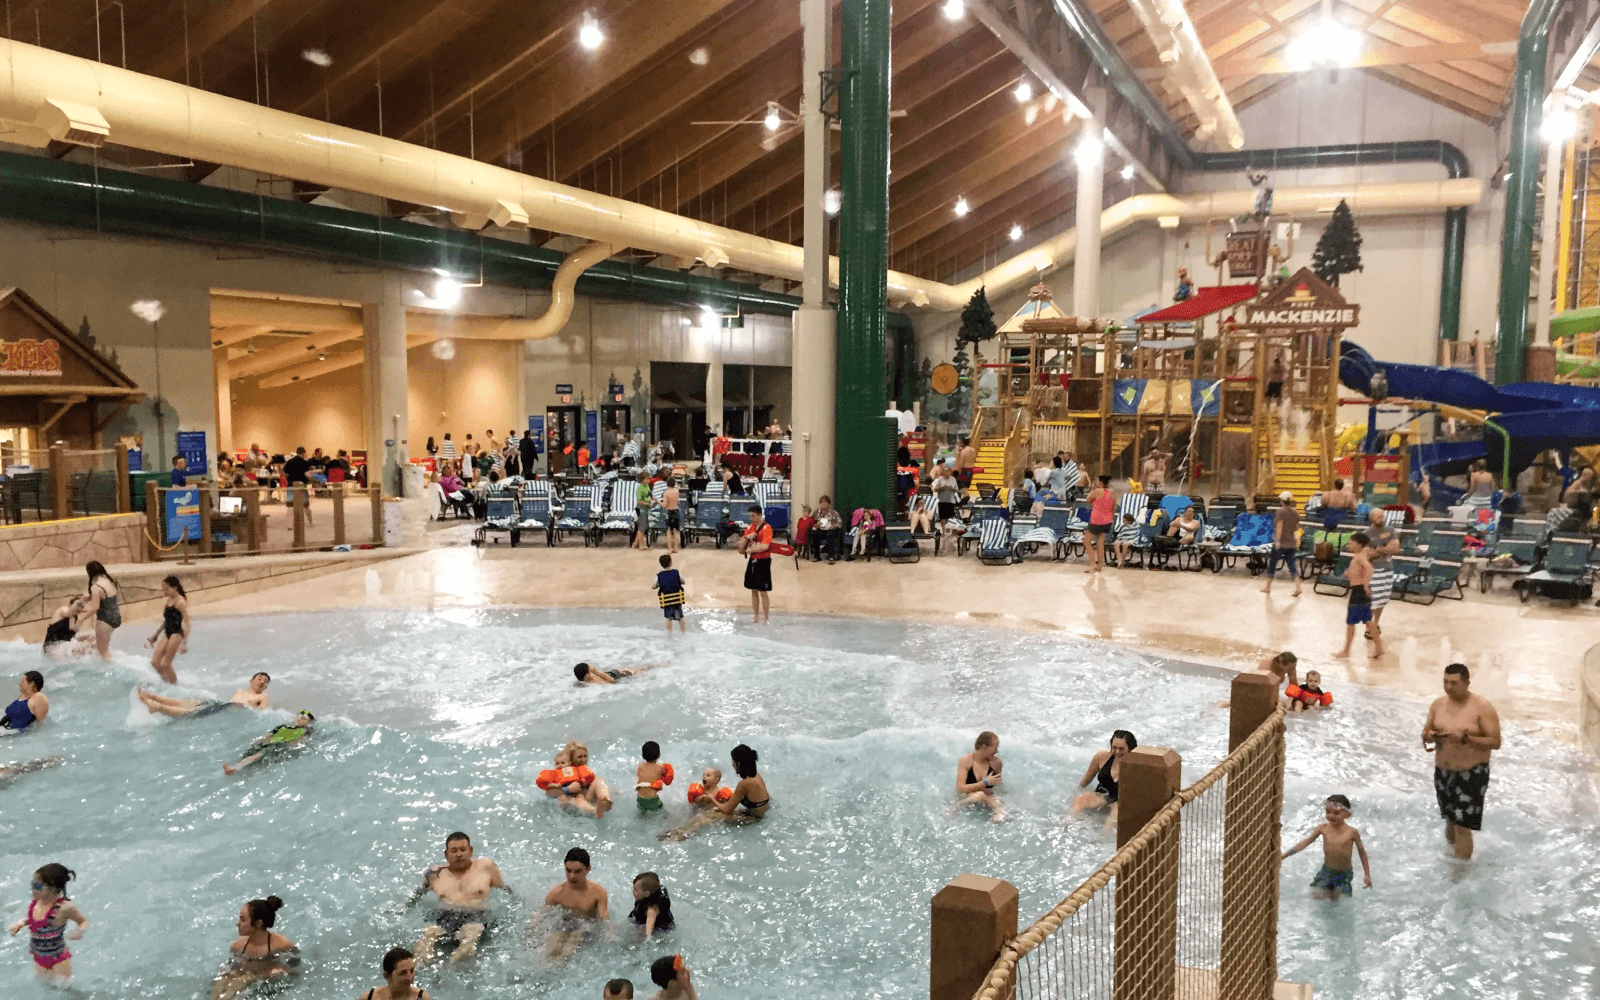 The Great Wolf Lodge and the indoor swimming pool